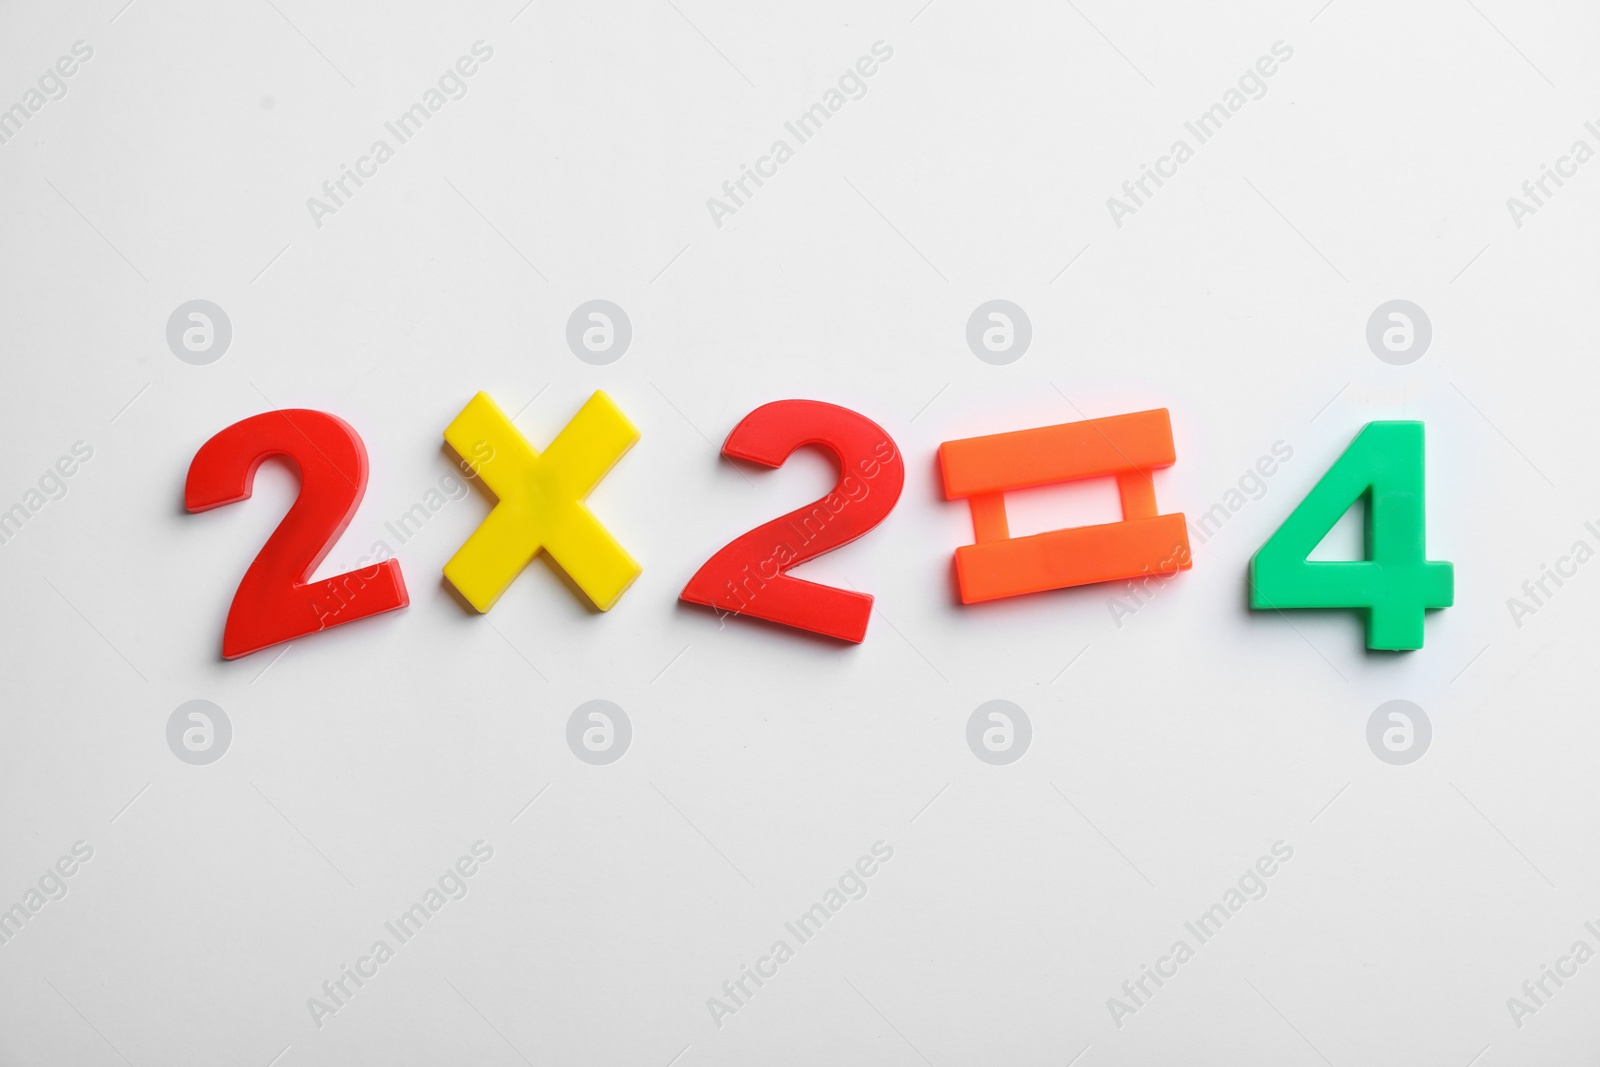 Photo of Math equation of magnetic numbers and symbols on white background, top view